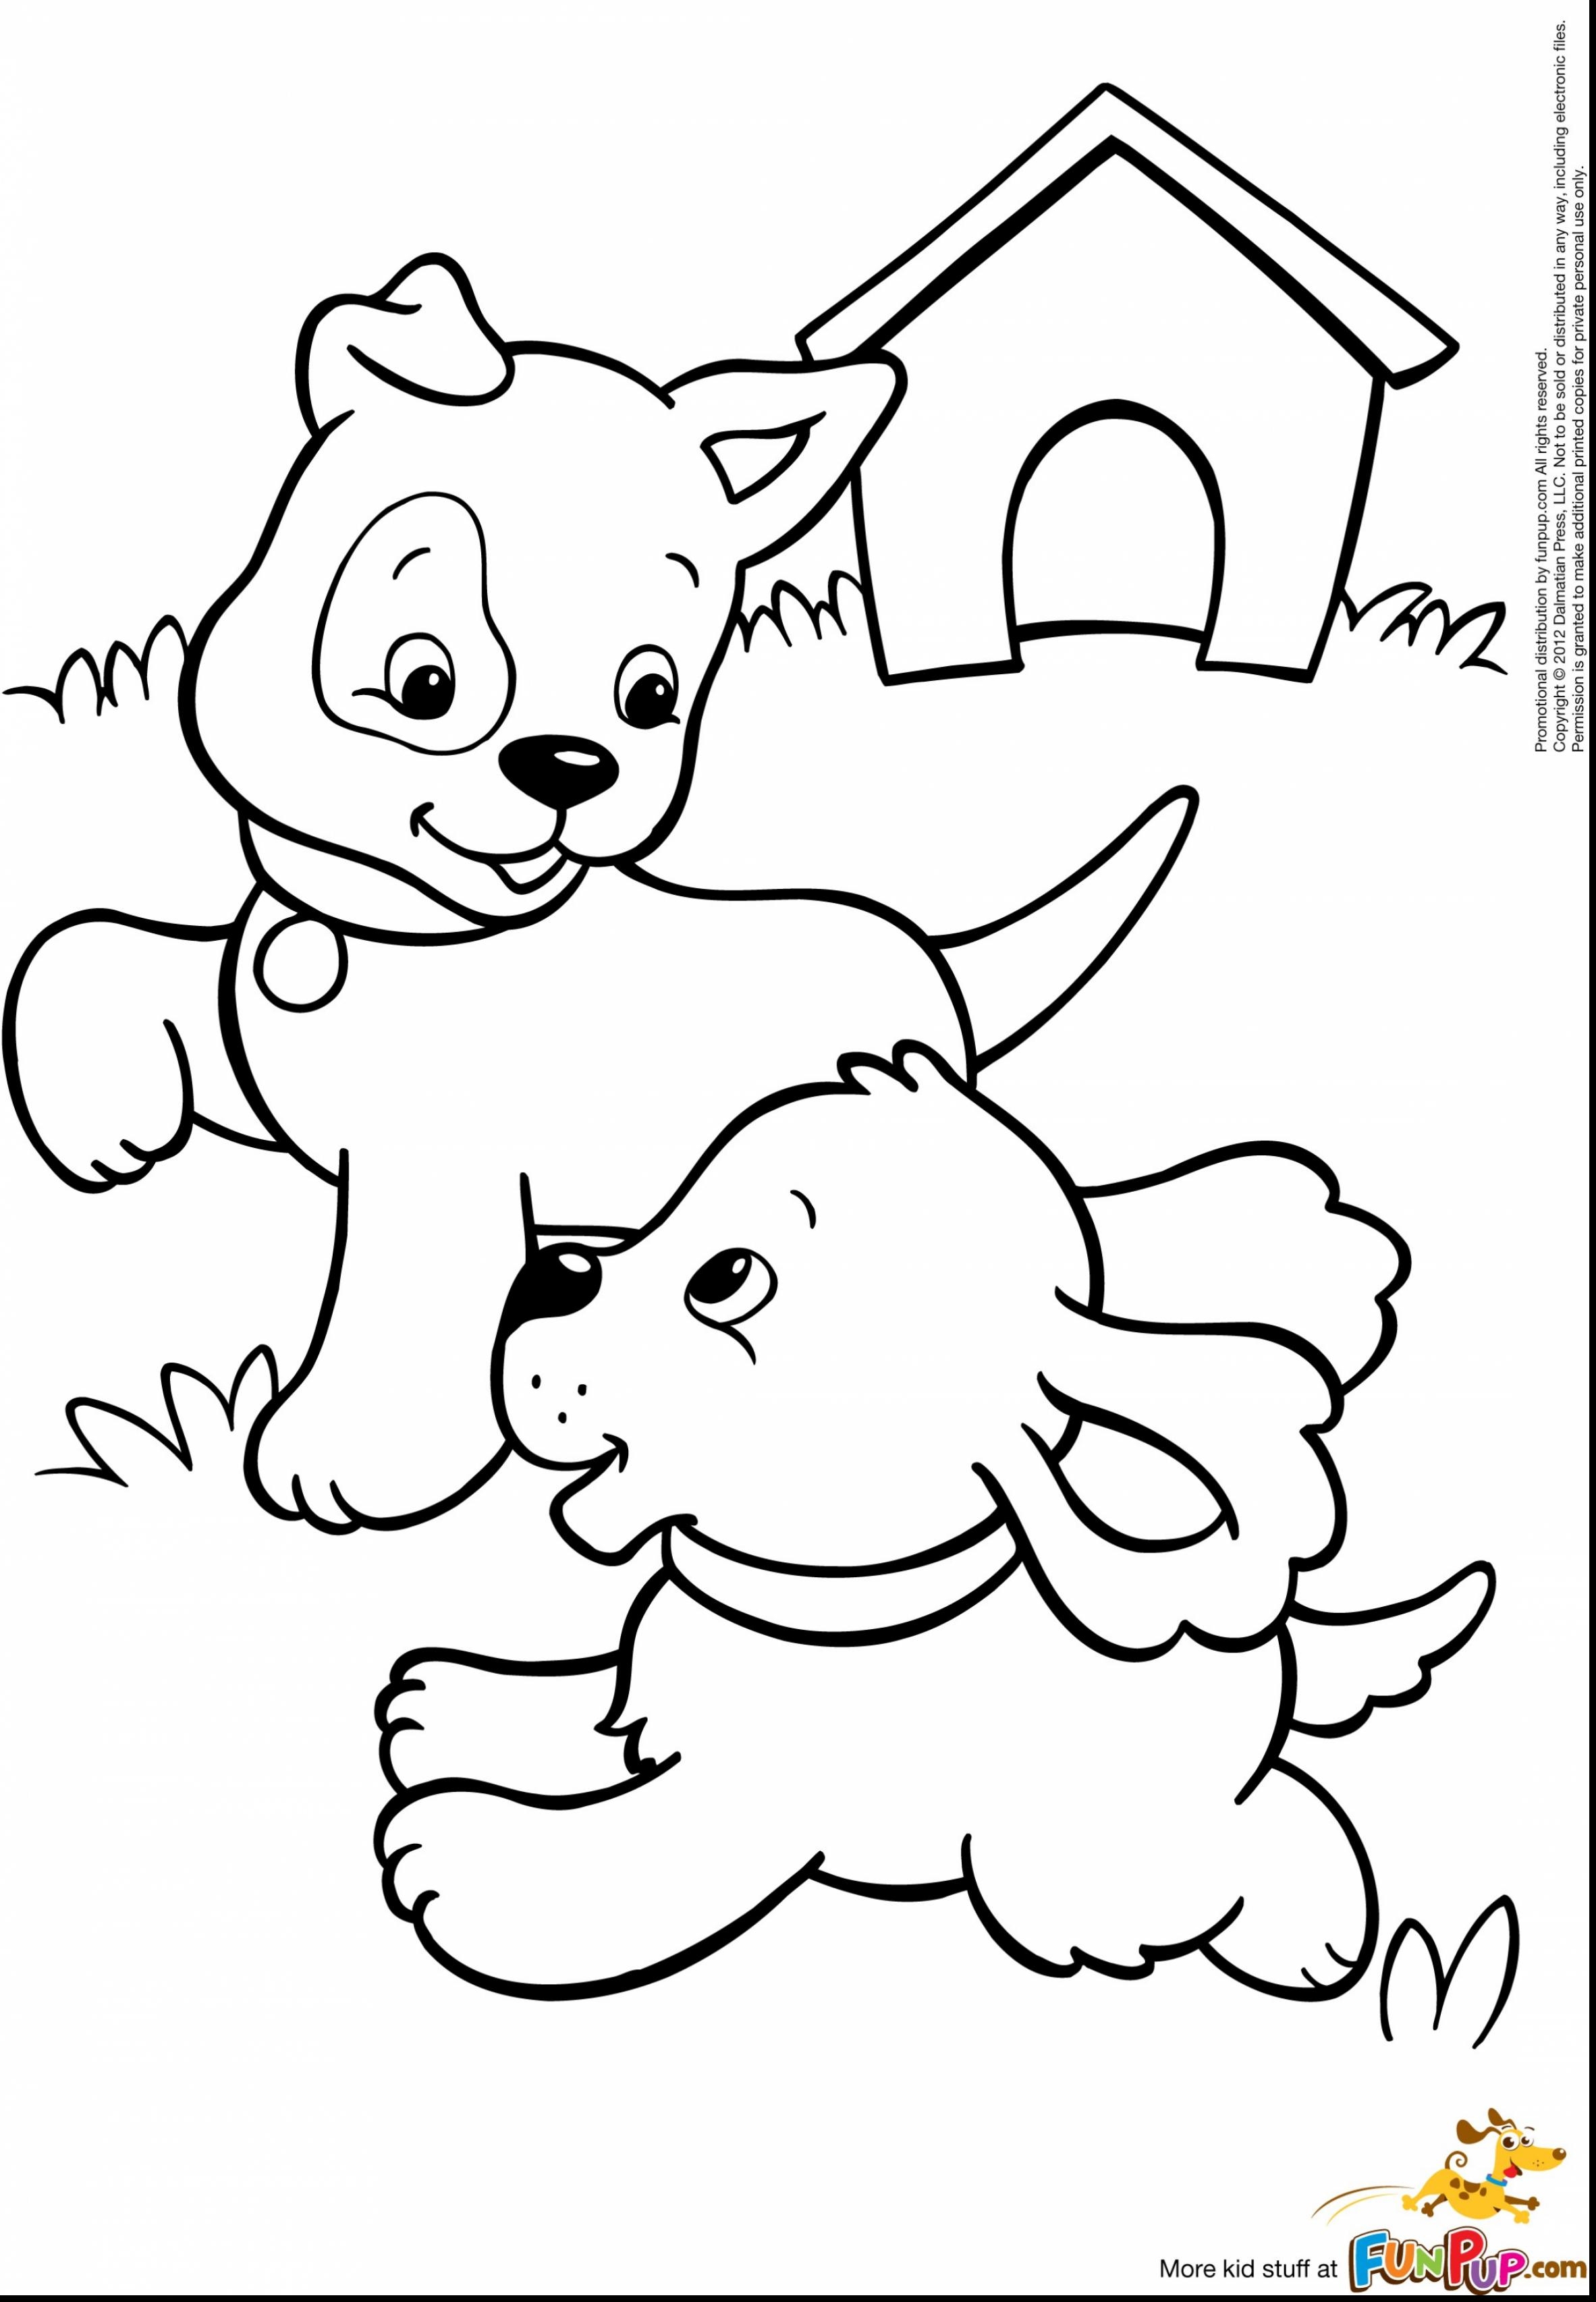 Boxer Dog Coloring Pages at GetColorings.com | Free printable colorings